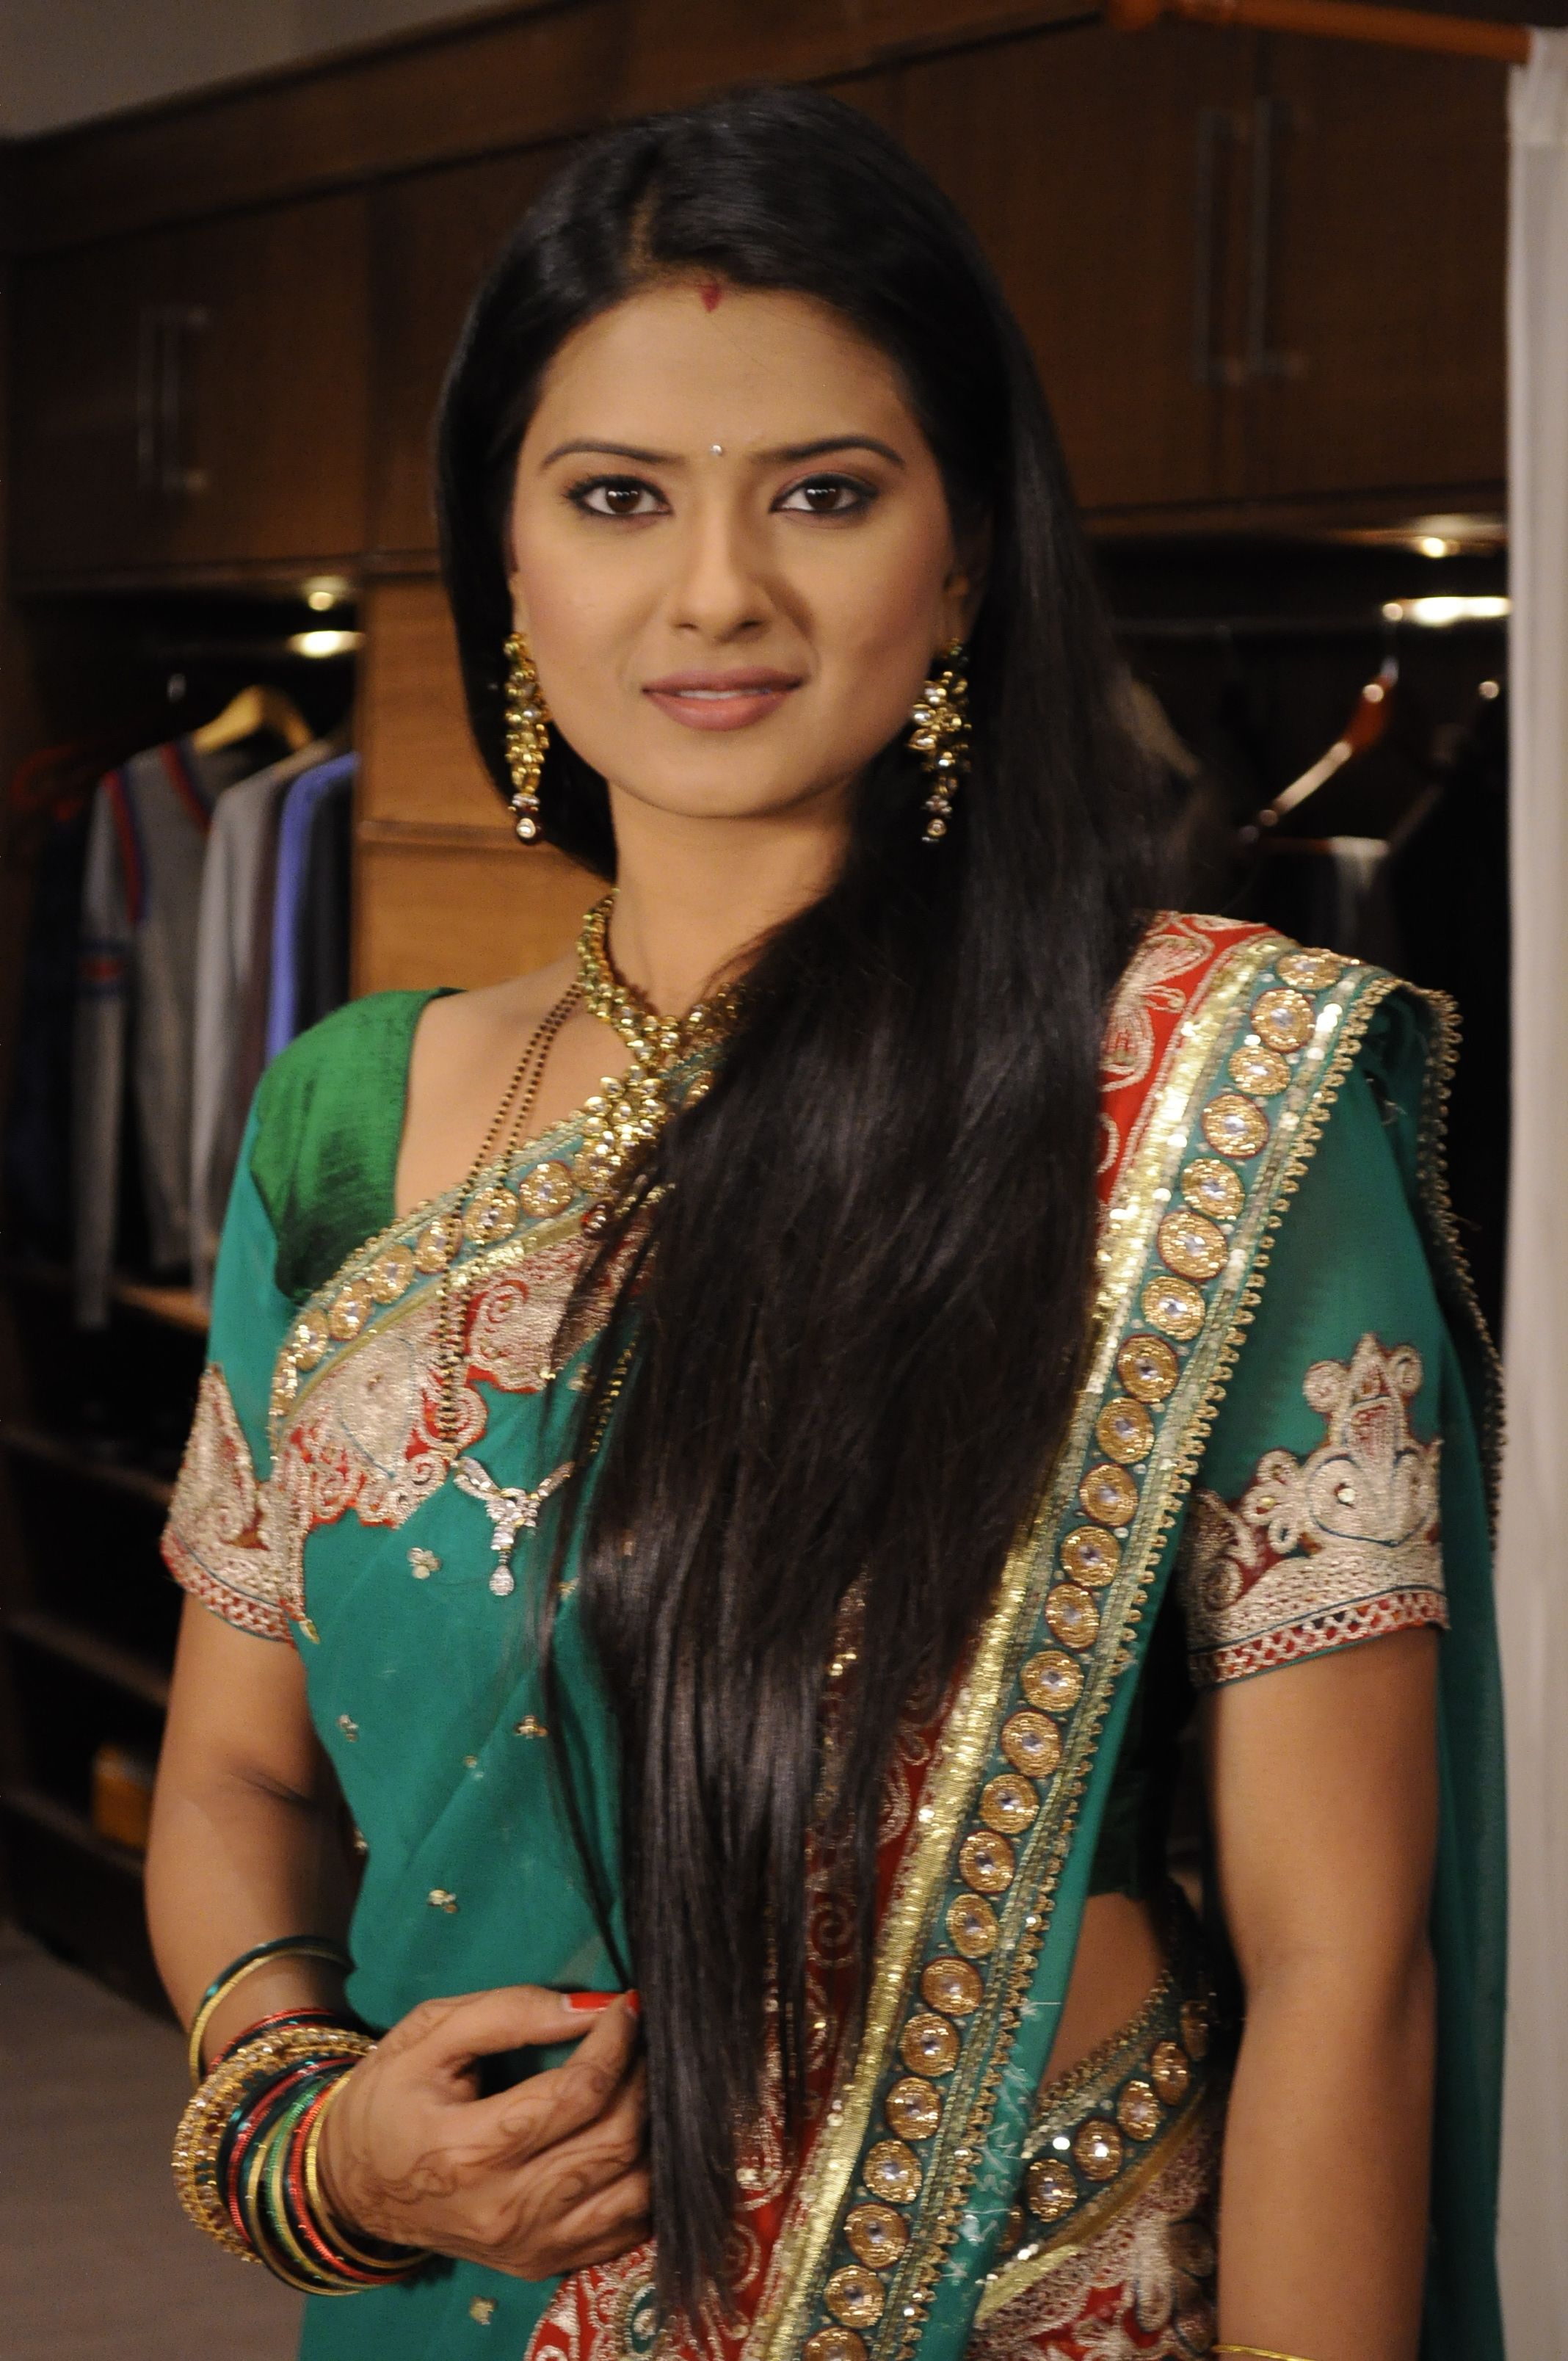 Who is Kratika Sengar, and what are some stunning photos 